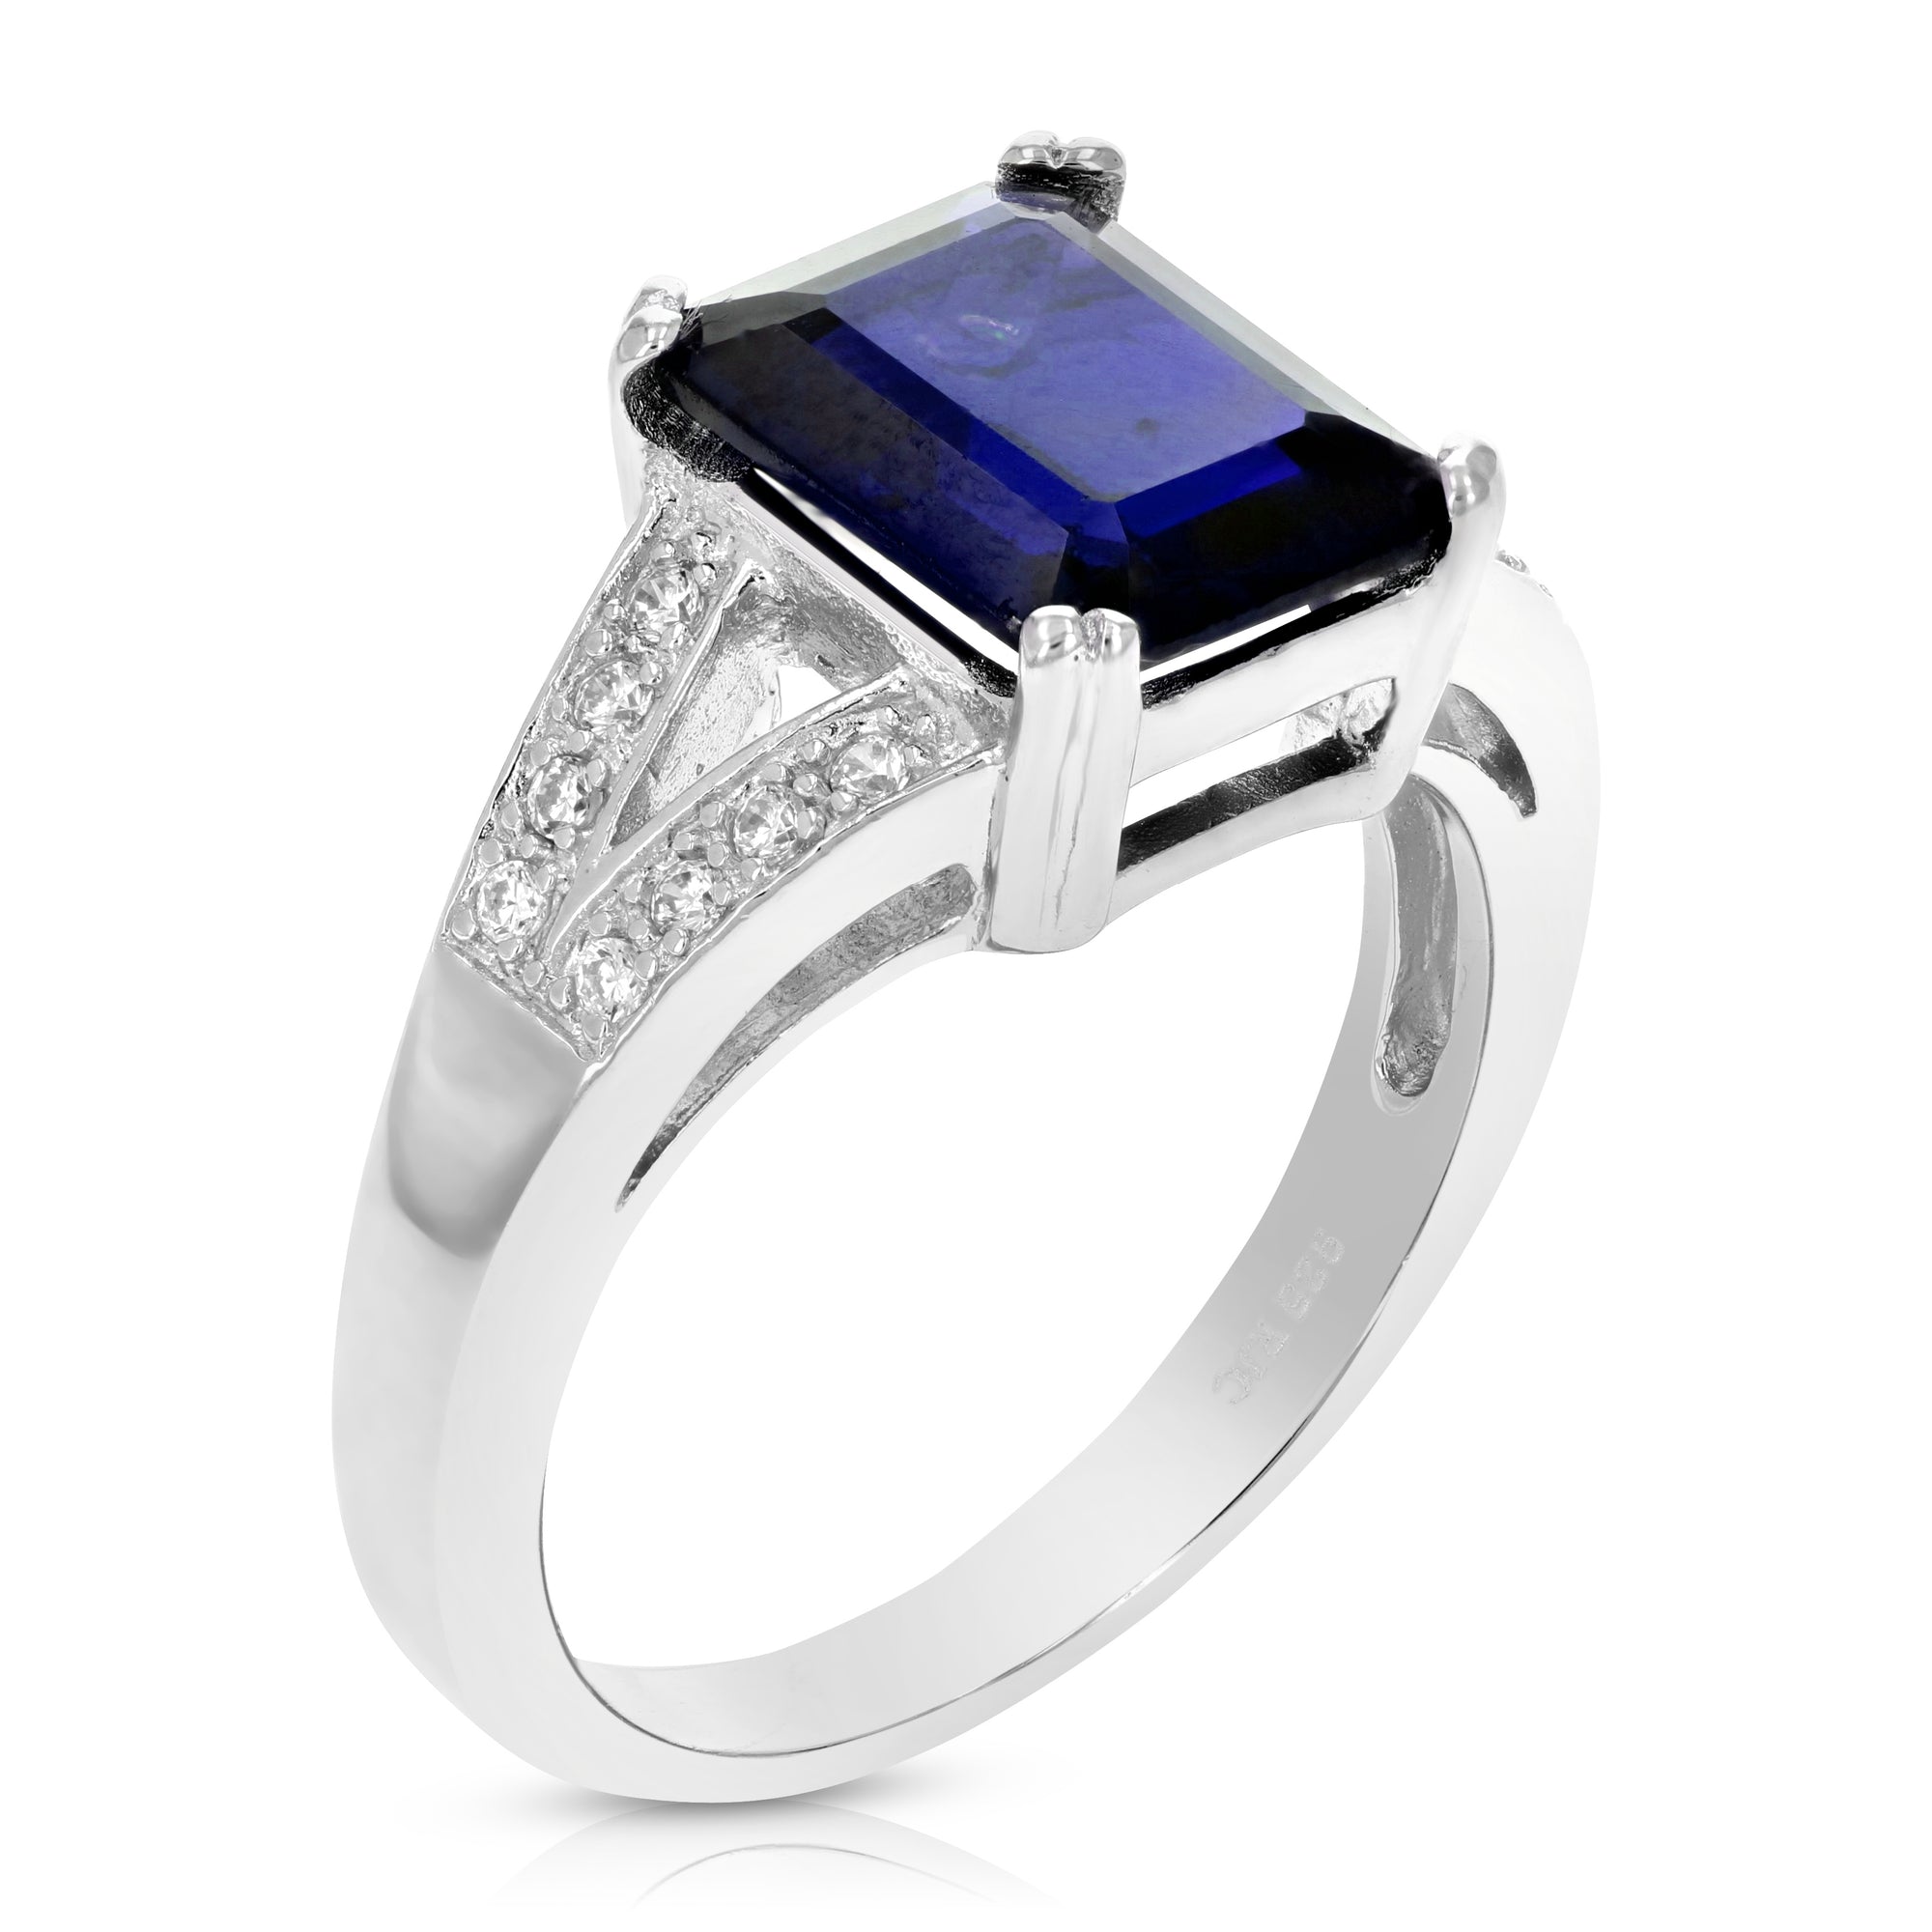 4.25 cttw Created Blue Sapphire Ring .925 Sterling Silver Emerald Shape 11x9 MM Size 7